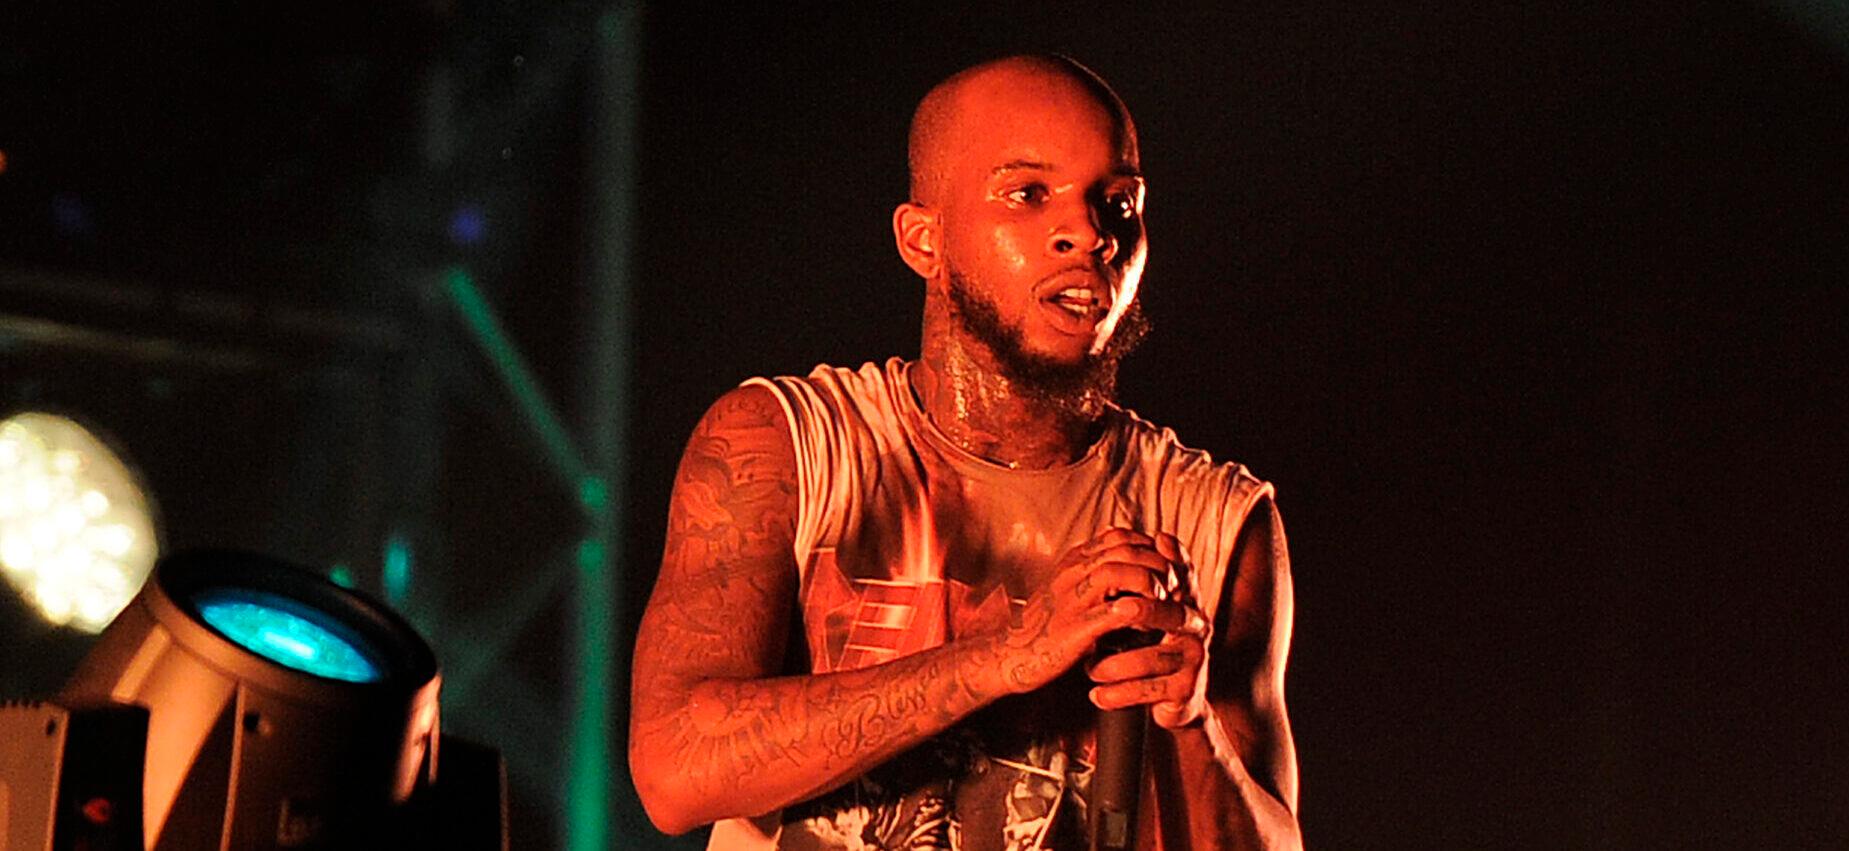 Tory Lanez performing at Reading Festival 2017